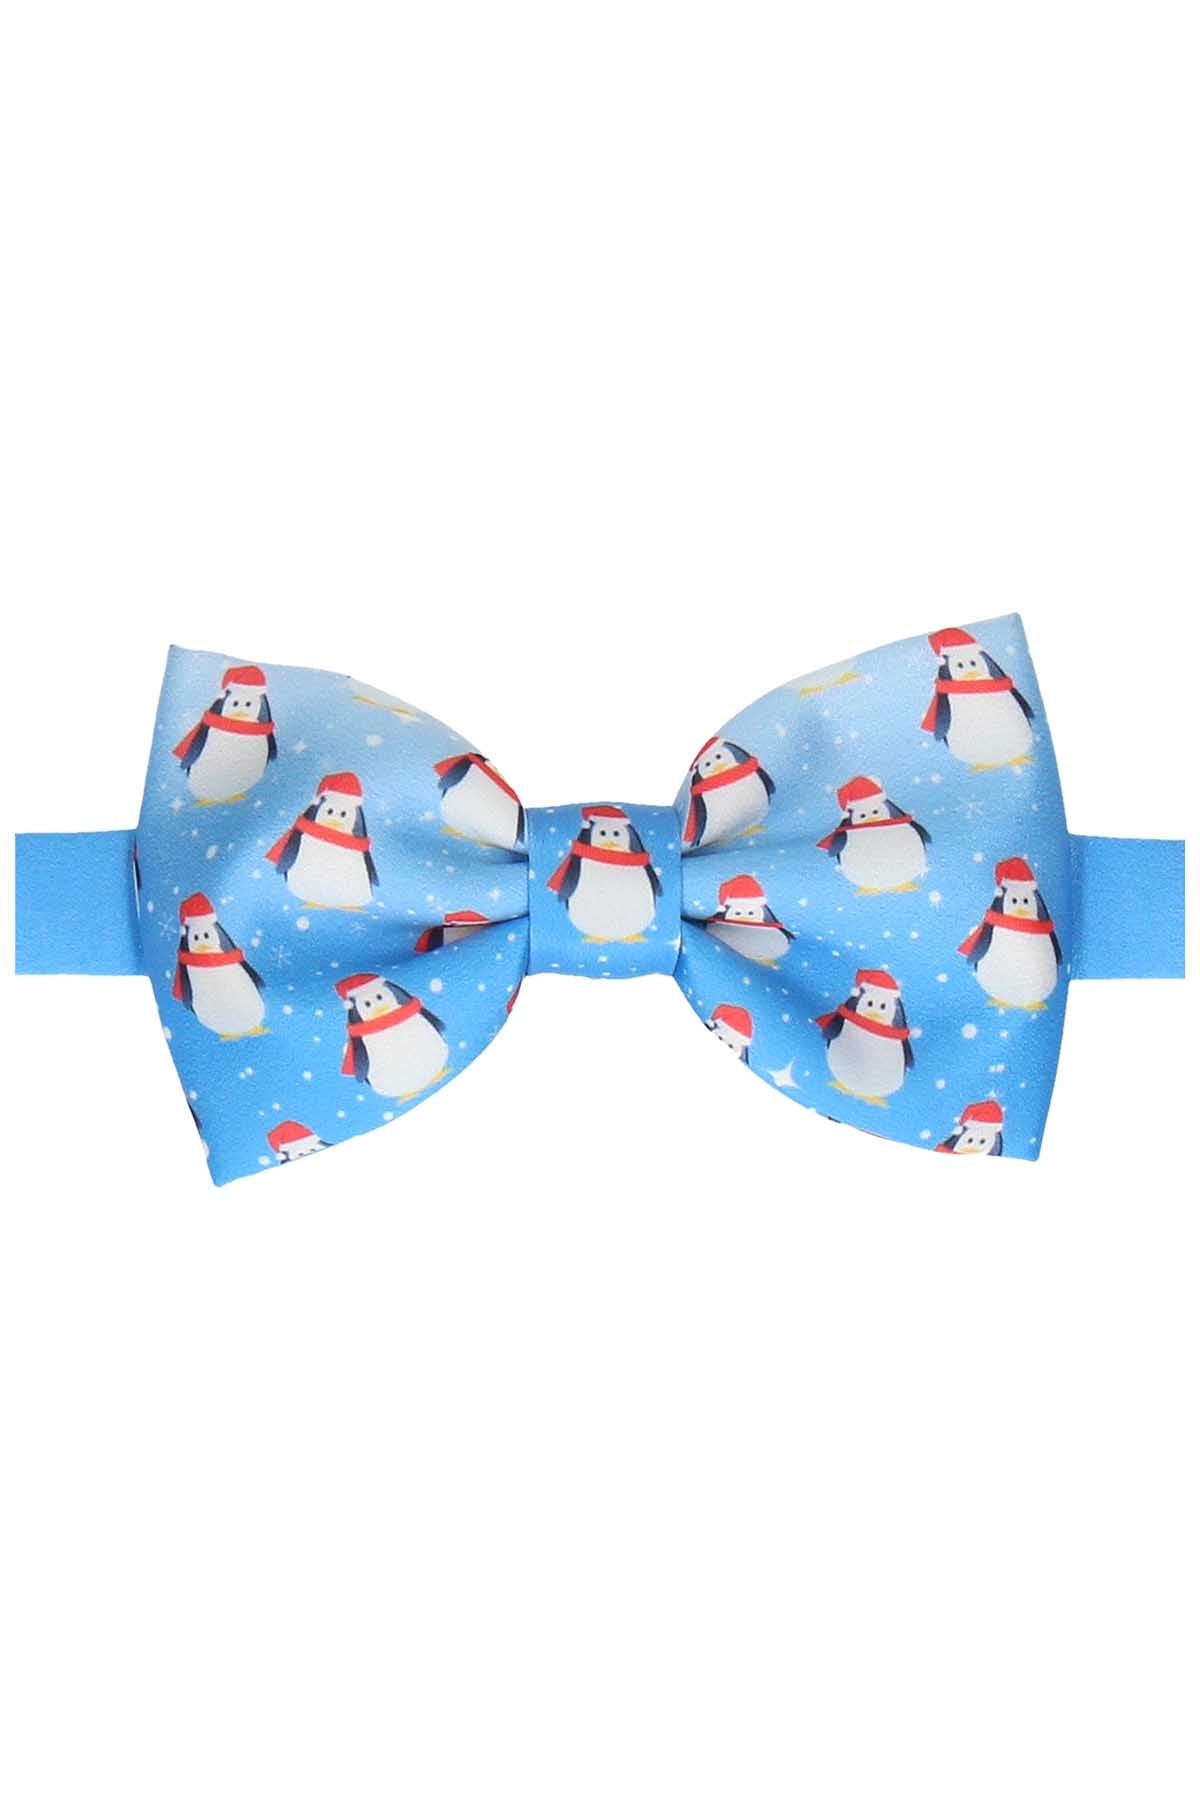 Mrs. Bow Tie Blue Penguins Ready-Tied Christmas Bow Tie